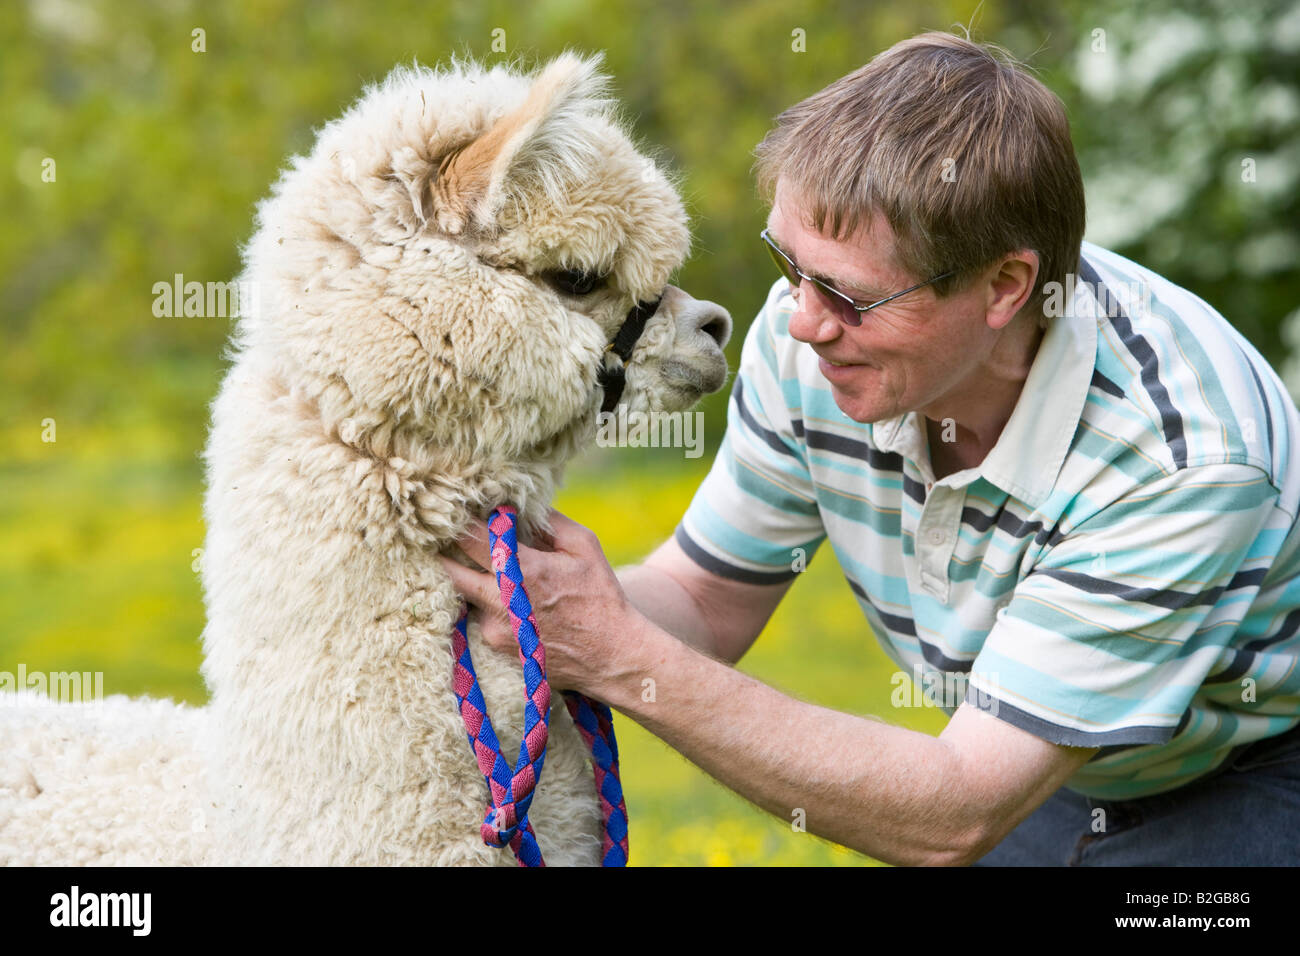 farmer with an alpaca stood in field of buttercups Stock Photo